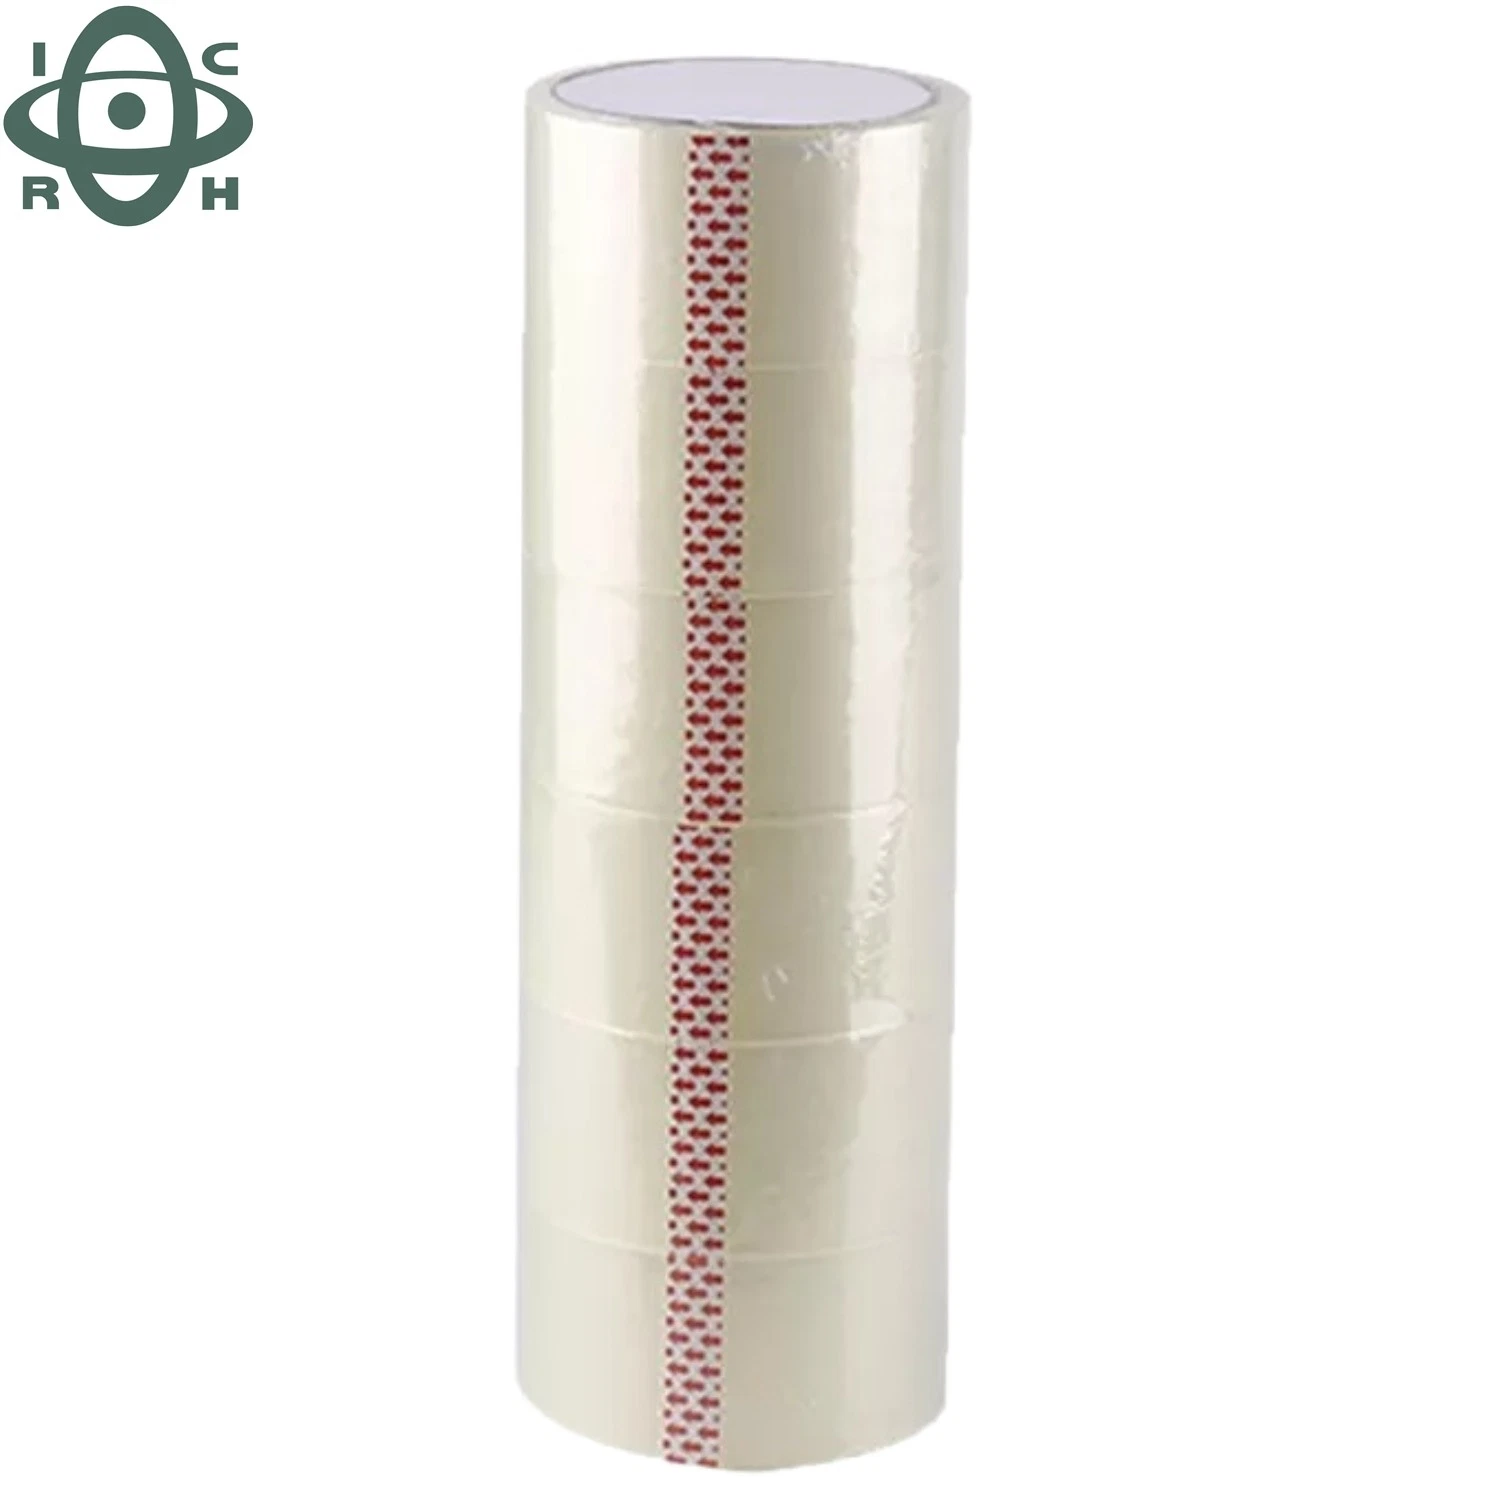 BOPP Material Adhesive Tape OPP Transparent Clear Tapes Sealing Tape